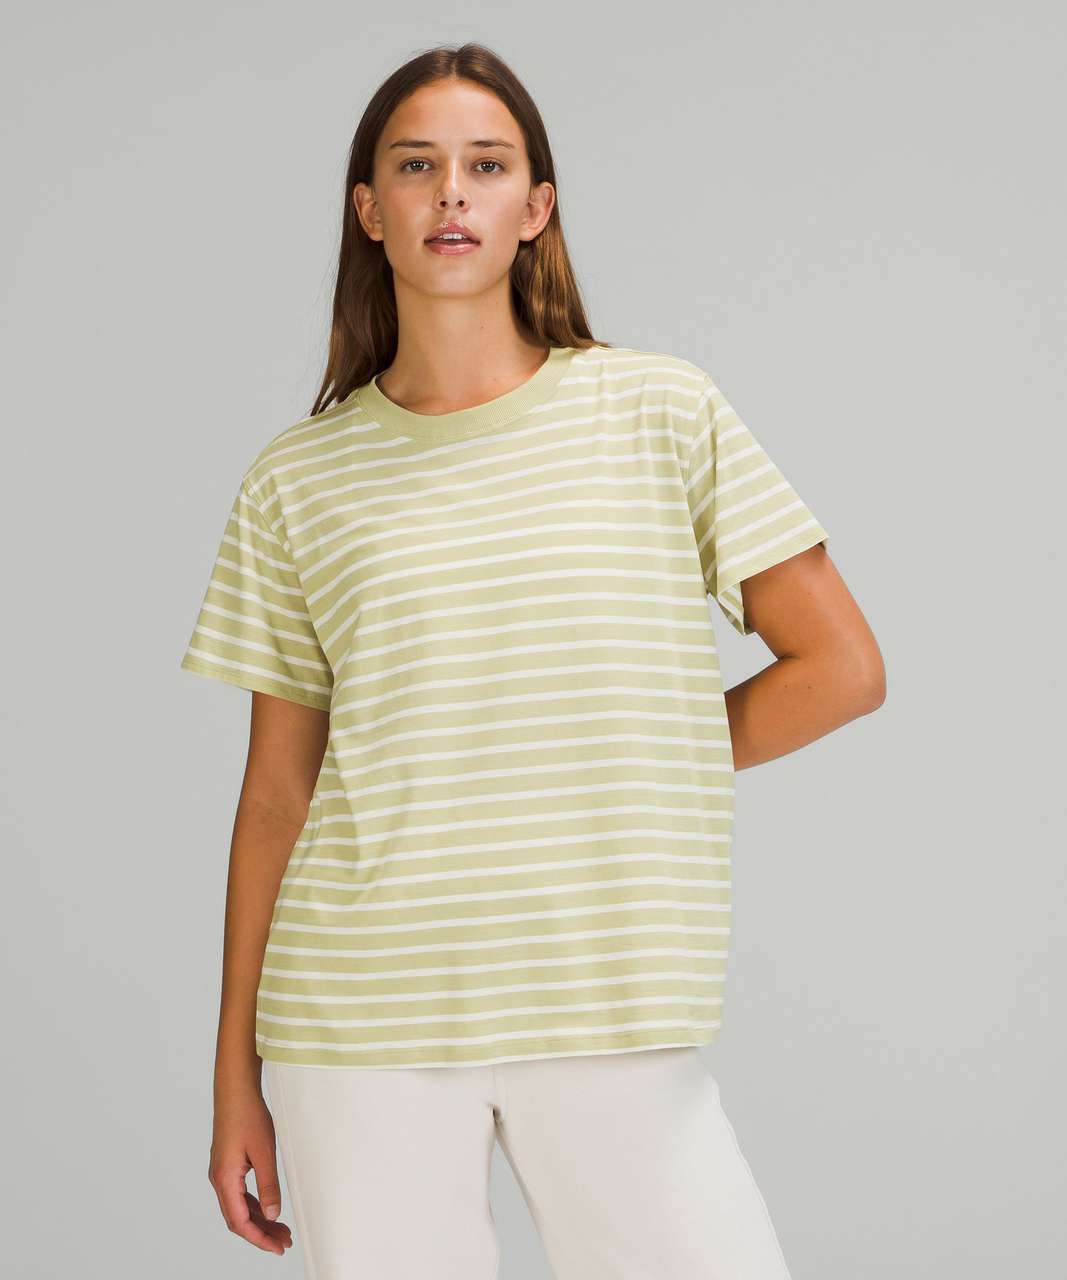 Lululemon All Yours Tee - Yachtie Stripe Dew Green White